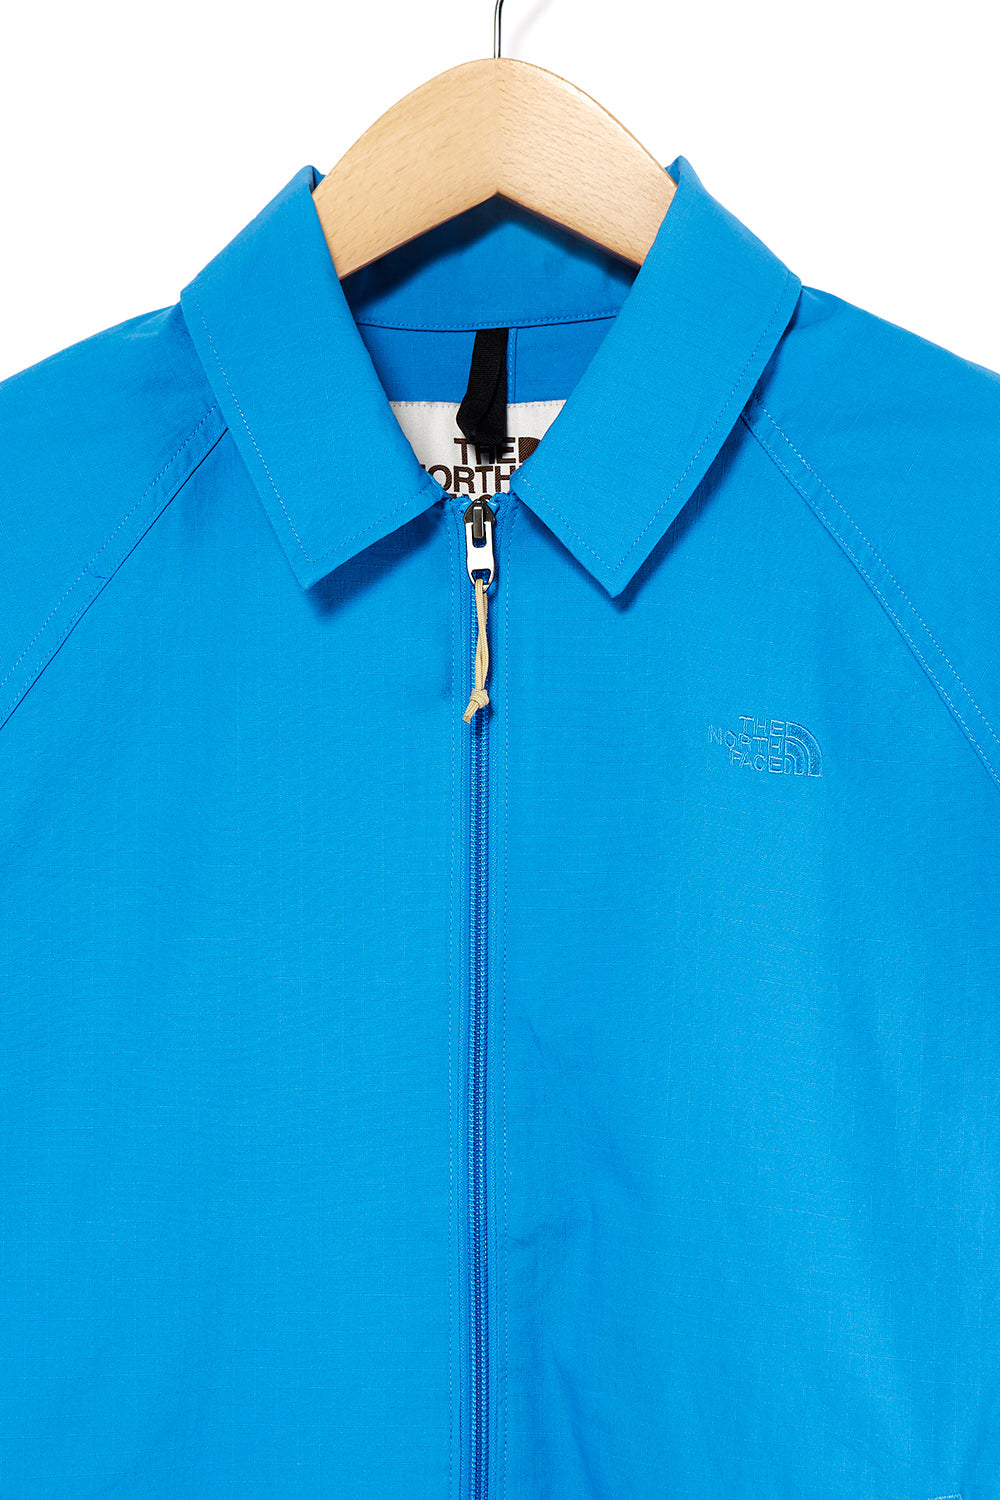 The North Face Ripstop Coaches Men's Jacket - Super Sonic Blue